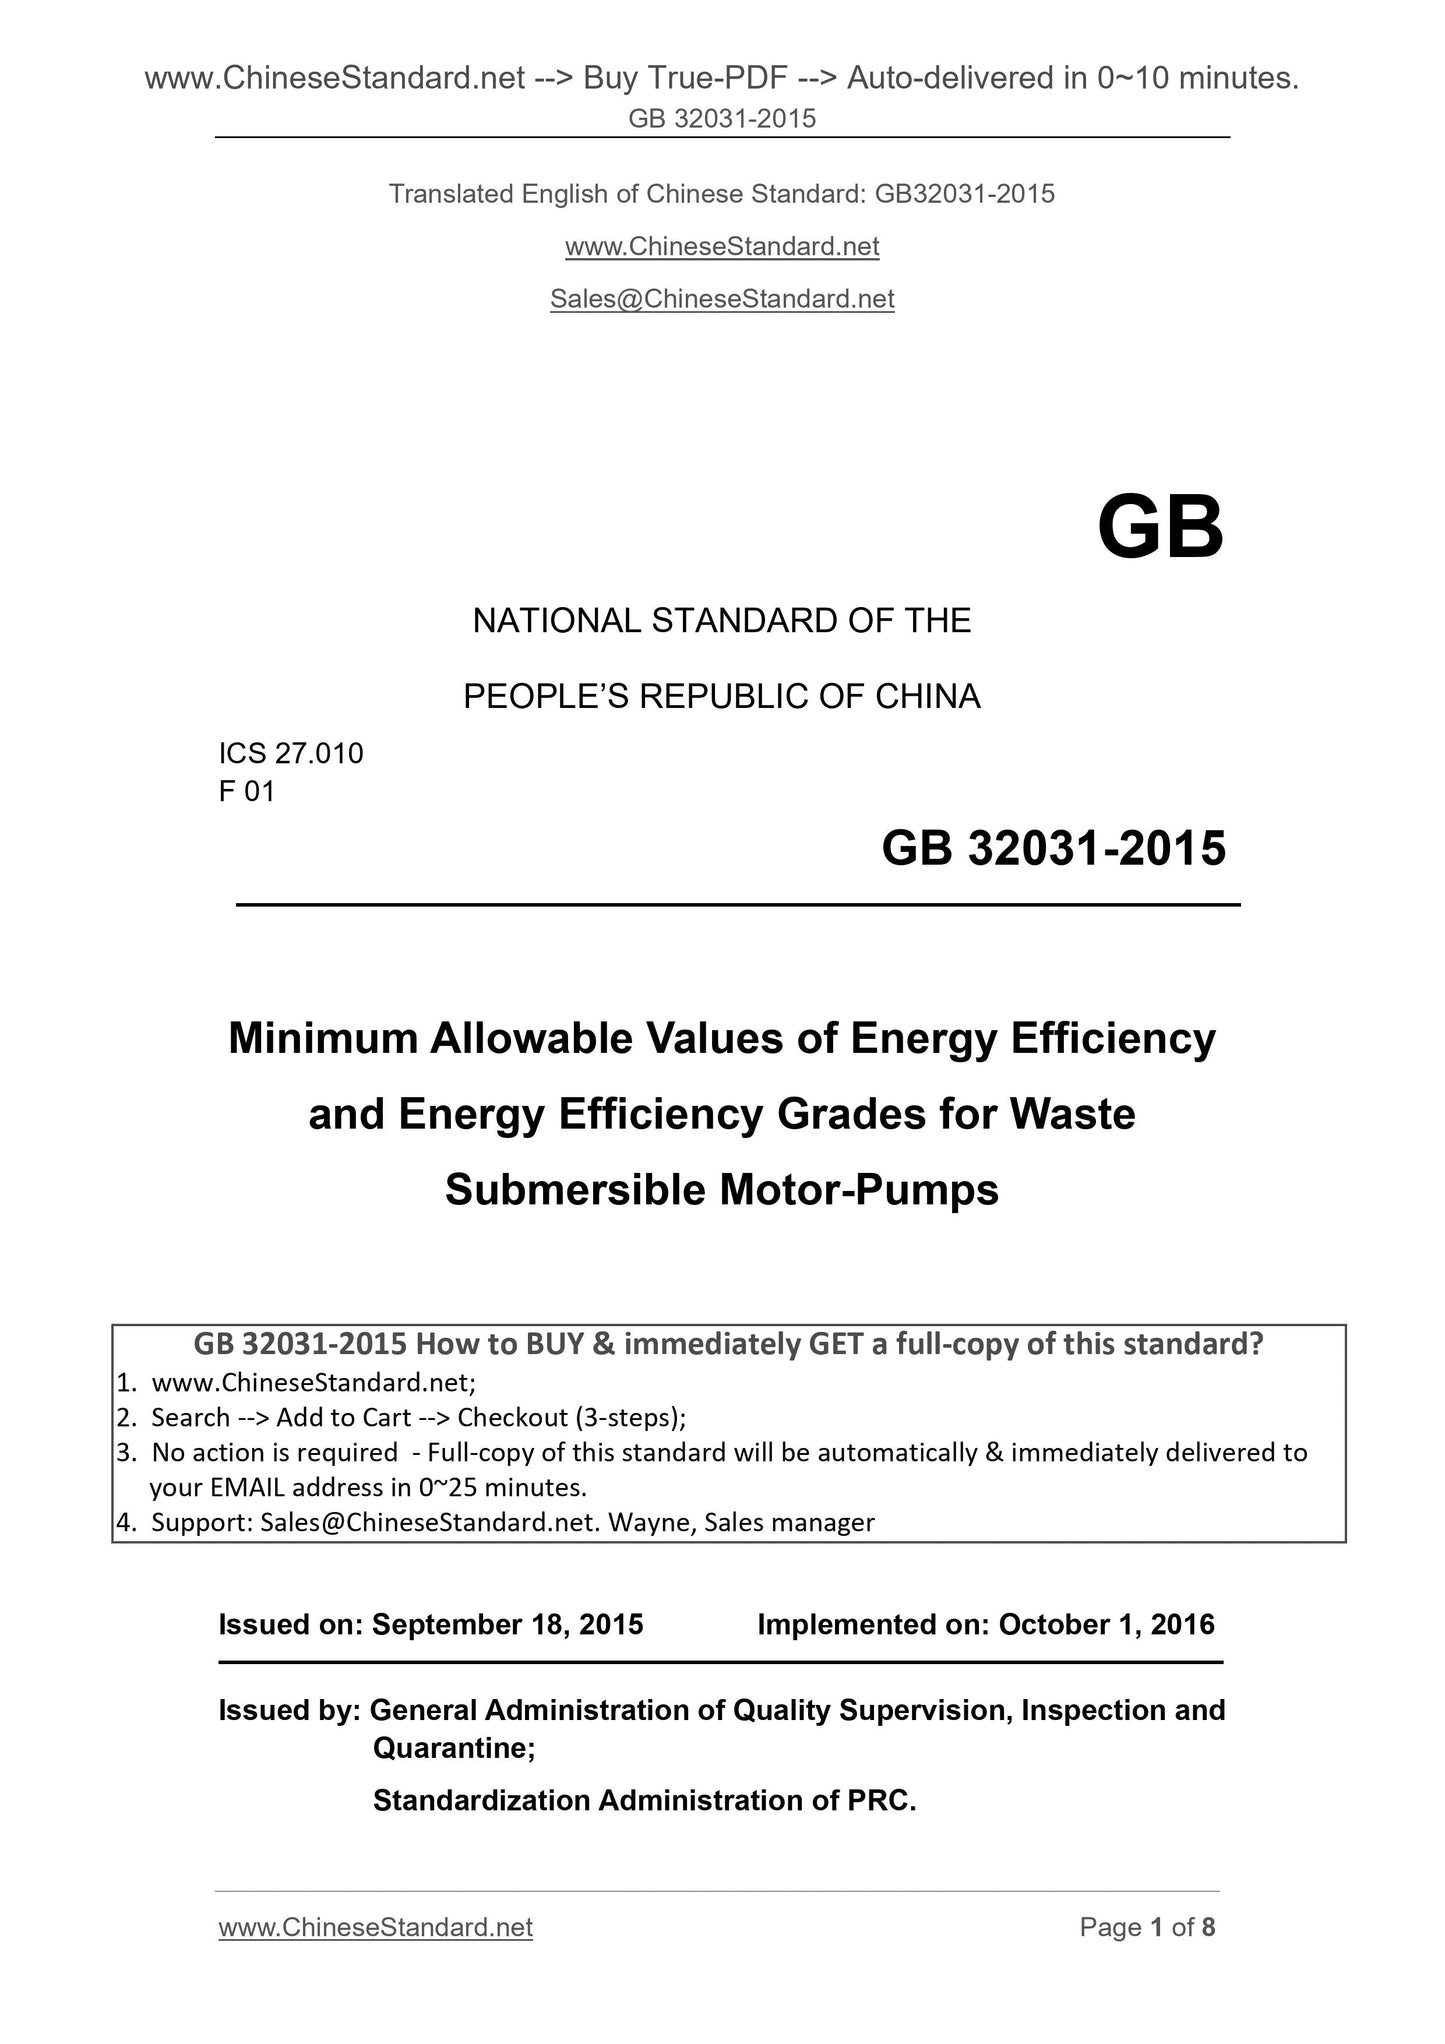 GB 32031-2015 Page 1